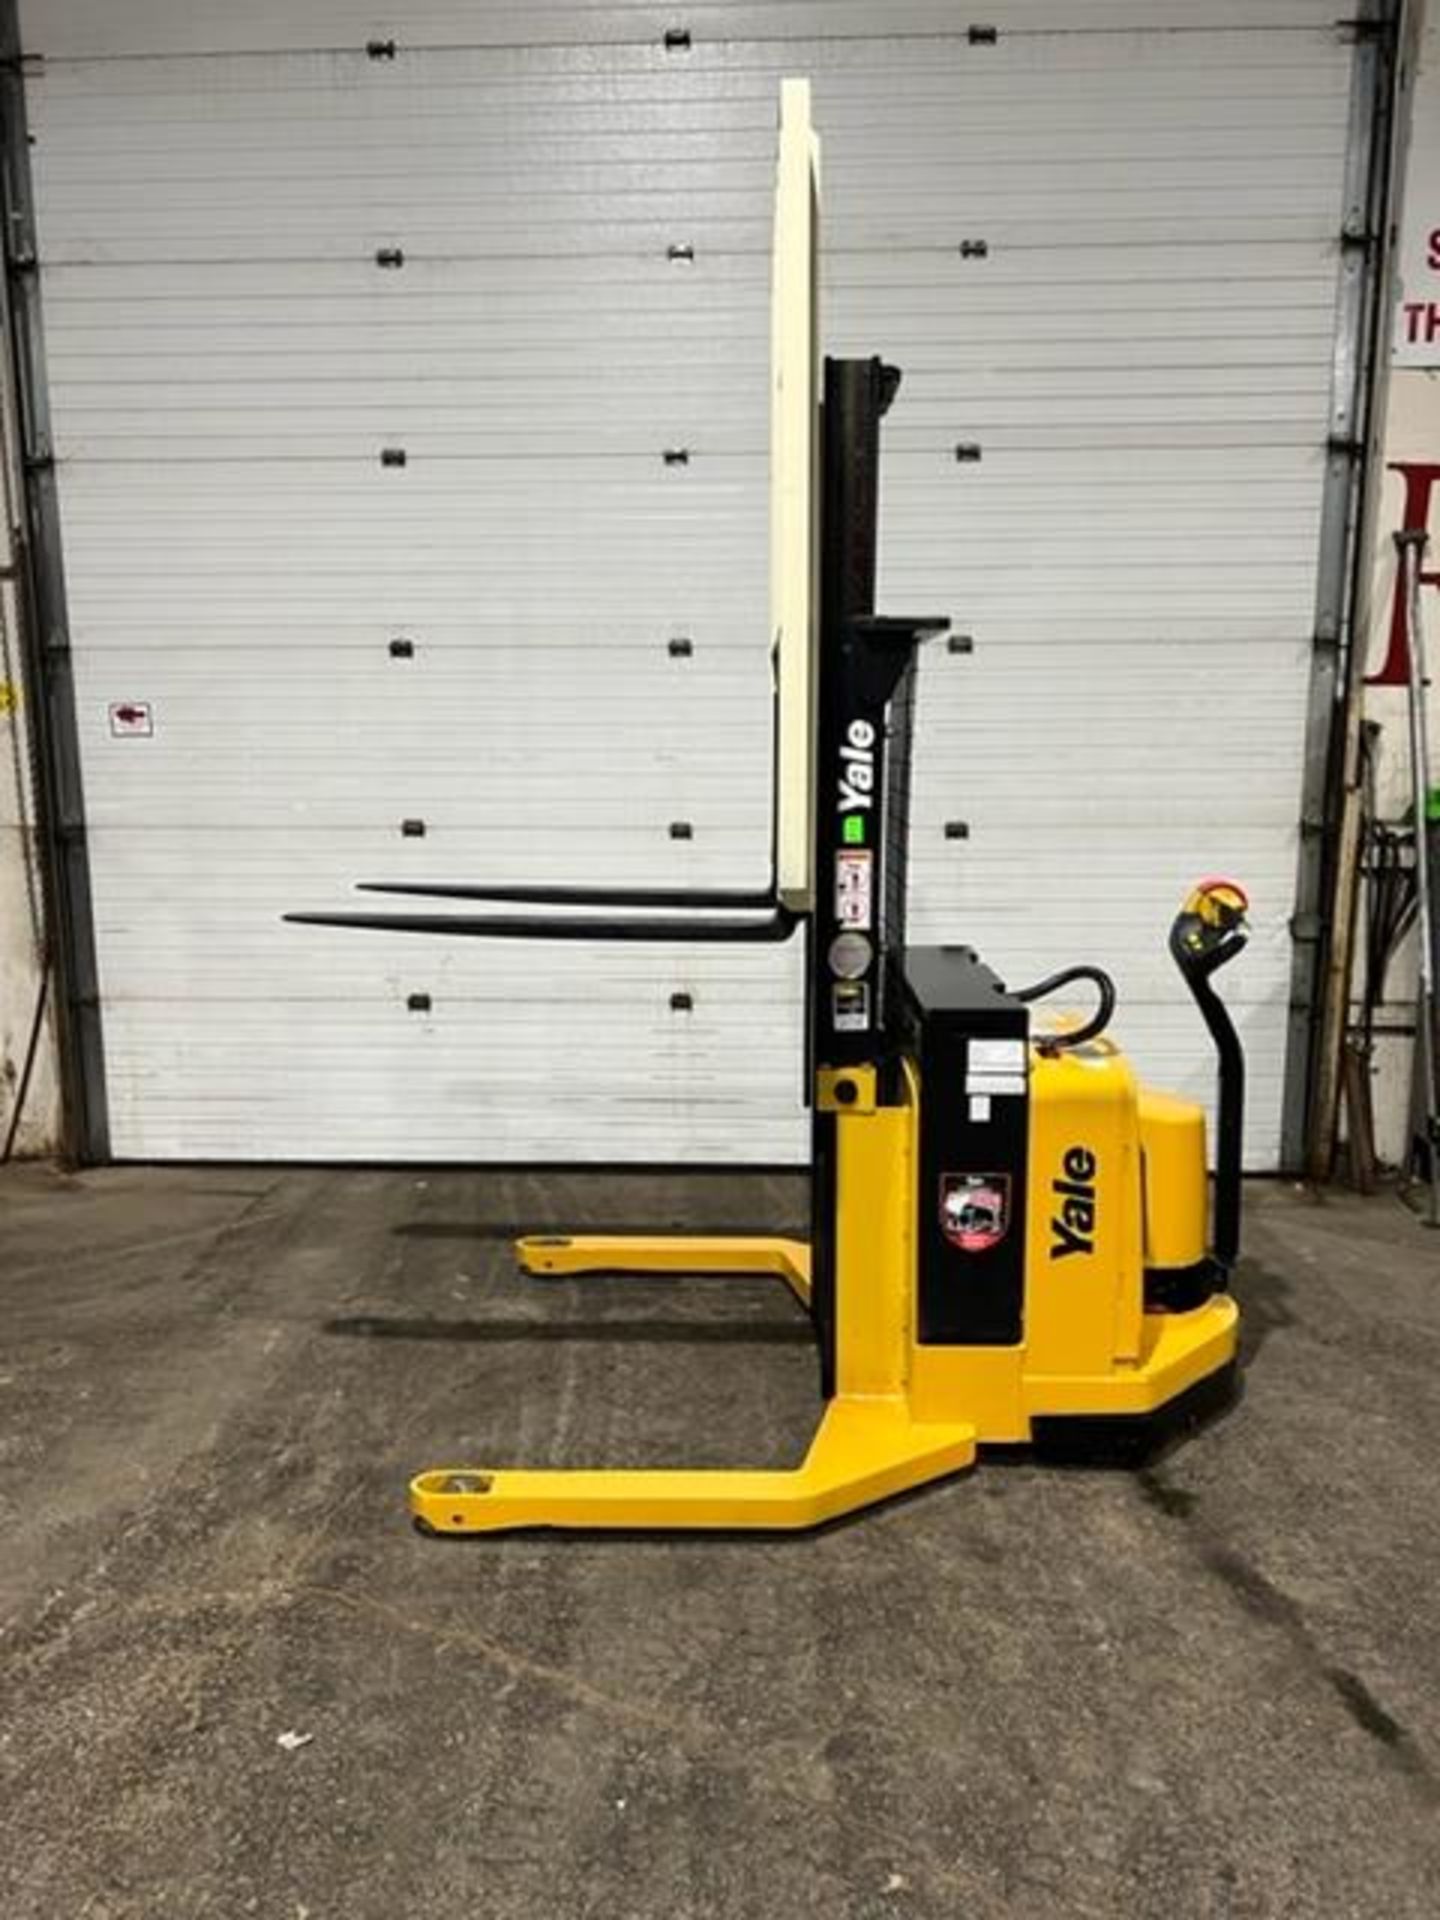 2010 Yale Pallet Stacker Walk Behind Order Picker 4000lbs capacity electric Powered Pallet Cart 24V